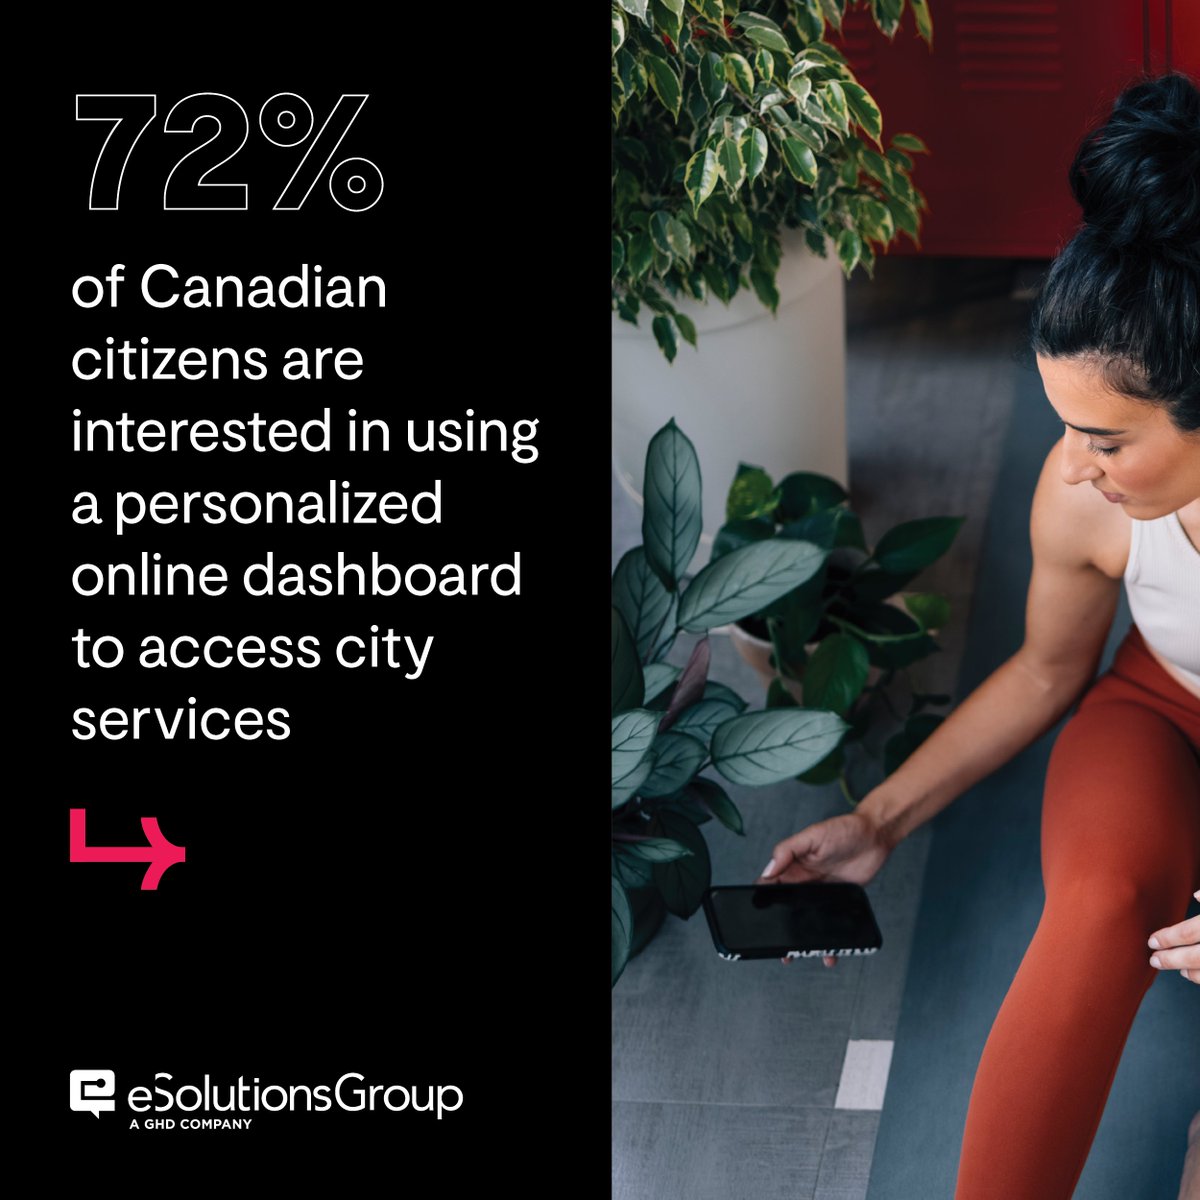 Did you know that 72% of Canadian citizens are interested in using a #personalized online dashboard to access your city services? Get insights like this and more in our #CitizenInsights whitepaper. hubs.ly/Q013-HBp0
#Municipal #Research #CityServices